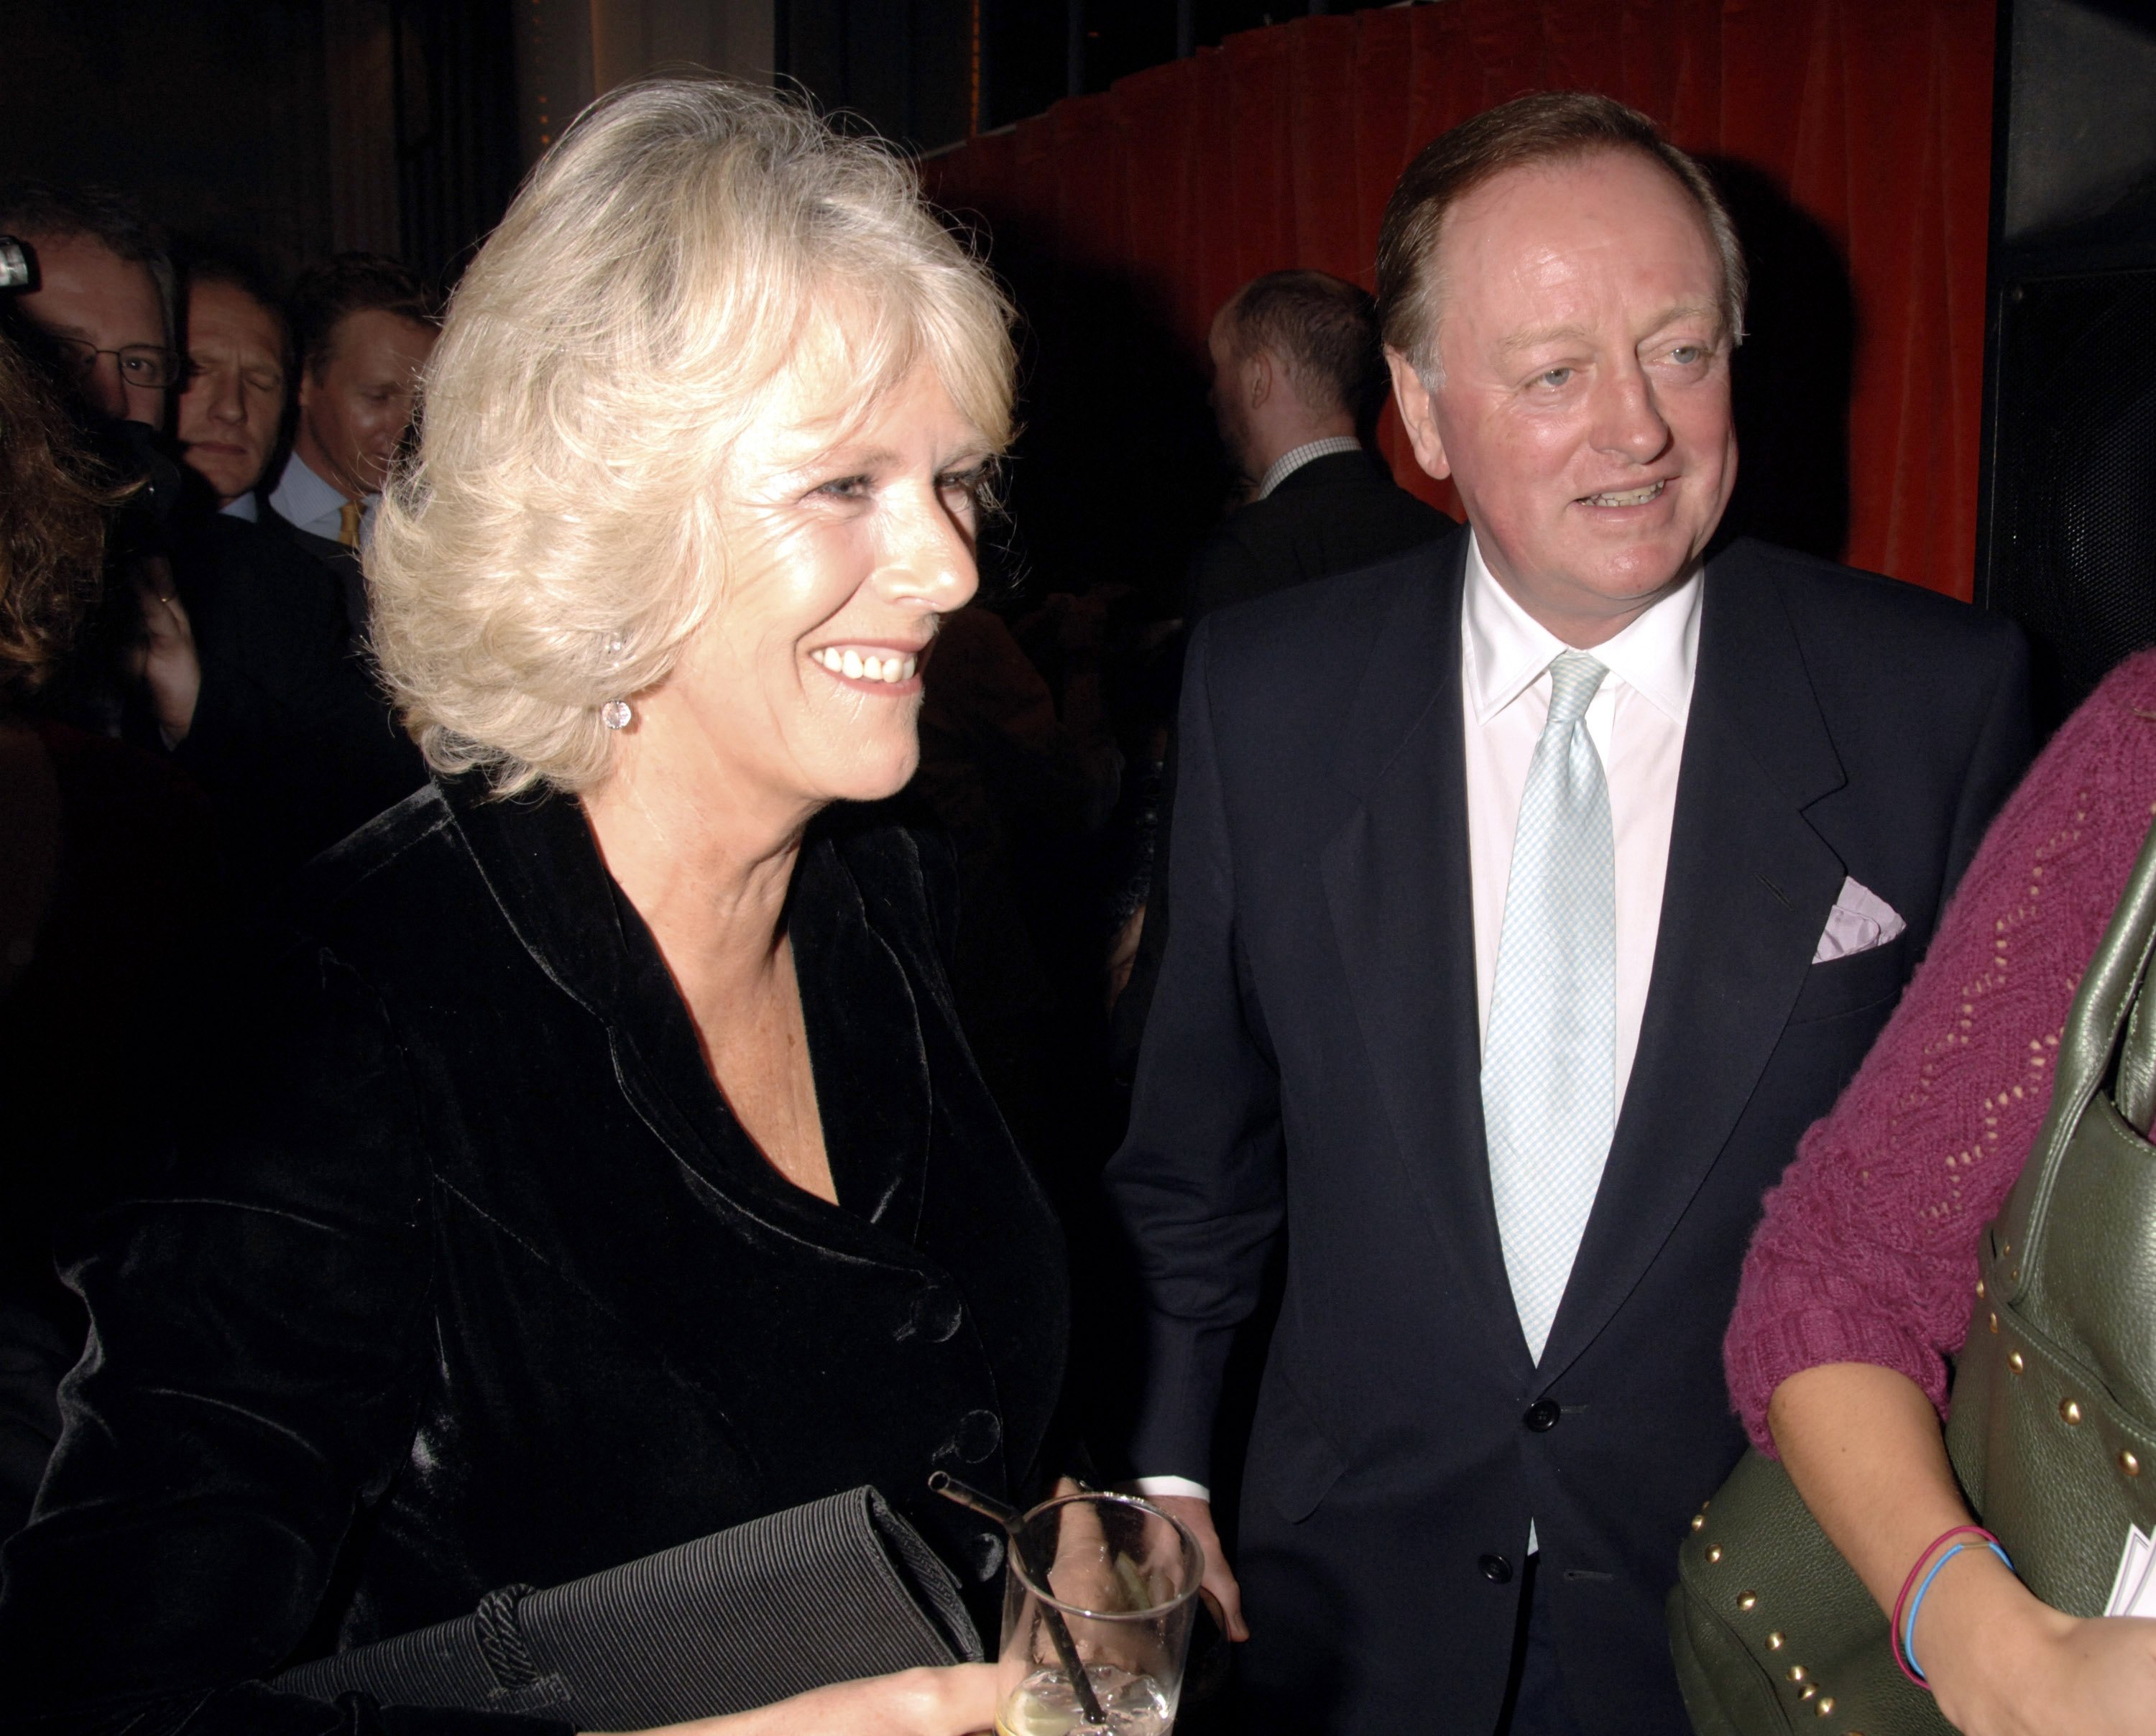 Camilla, Duchess of Cornwall and Andrew Parker Bowles attend the book launch of 'The Year Of Eating Dangerously' by Tom Parker Bowles, in London, England, on October 12, 2006. | Source: Getty Images